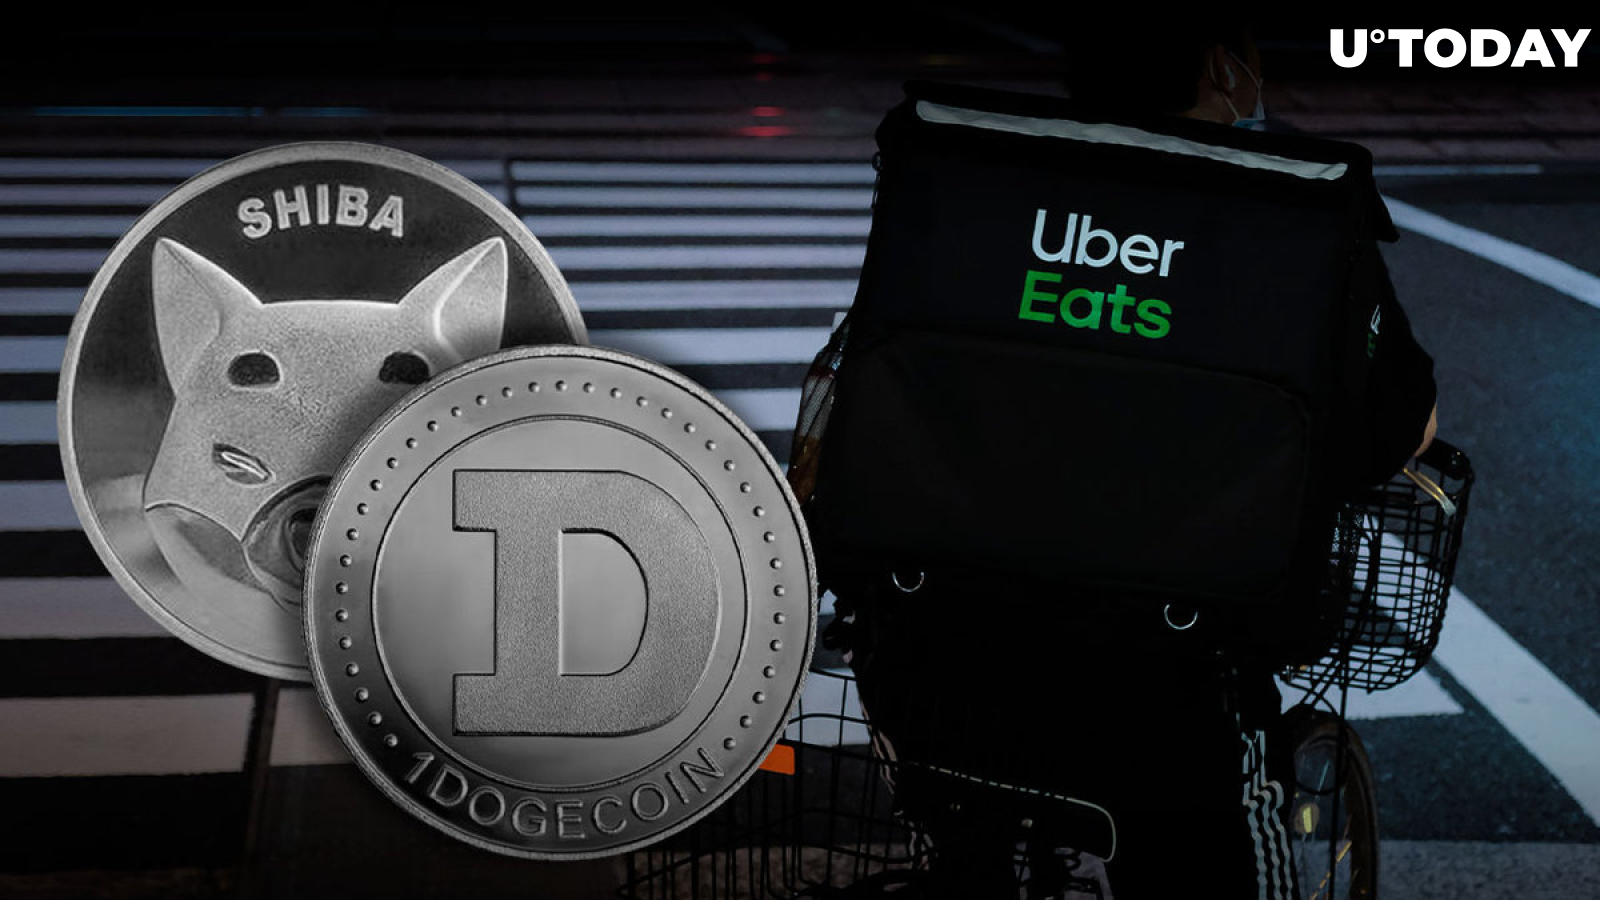 Shiba Inu, Dogecoin Accepted for Payment by Food Delivery Company Uber Eats